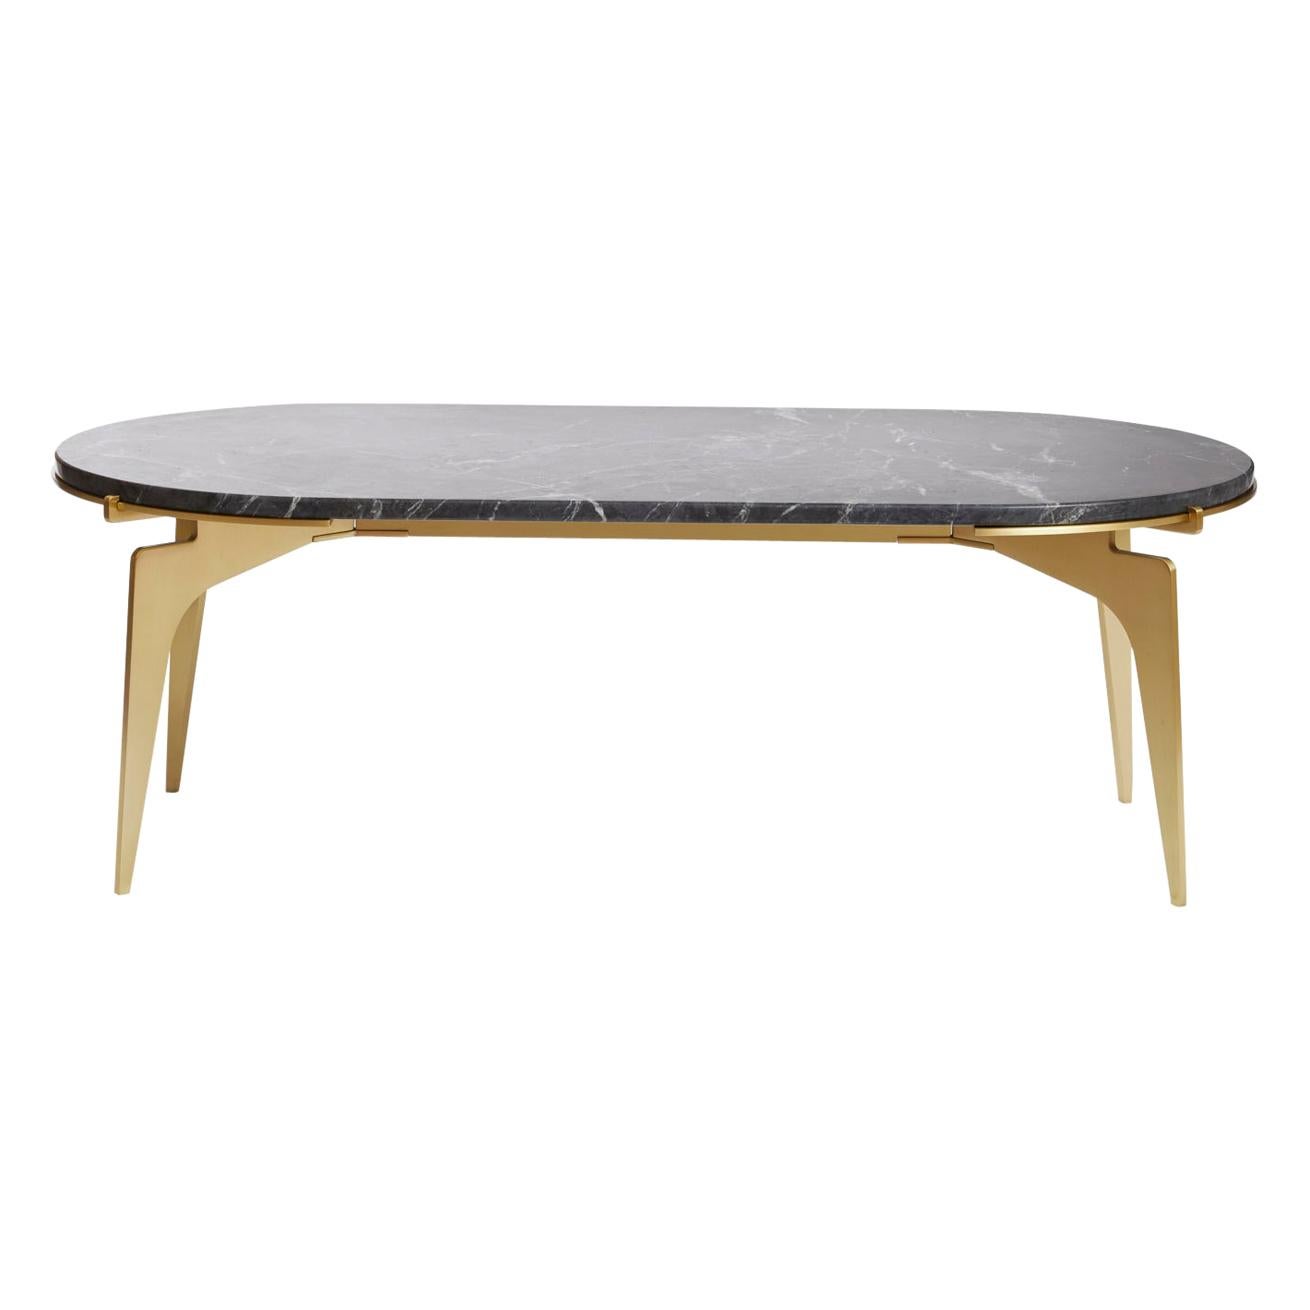 Black (Grigio Carnico - Black Stone) Prong Racetrack Coffee Table in Brass Base with Marble Top by Gabriel Scott